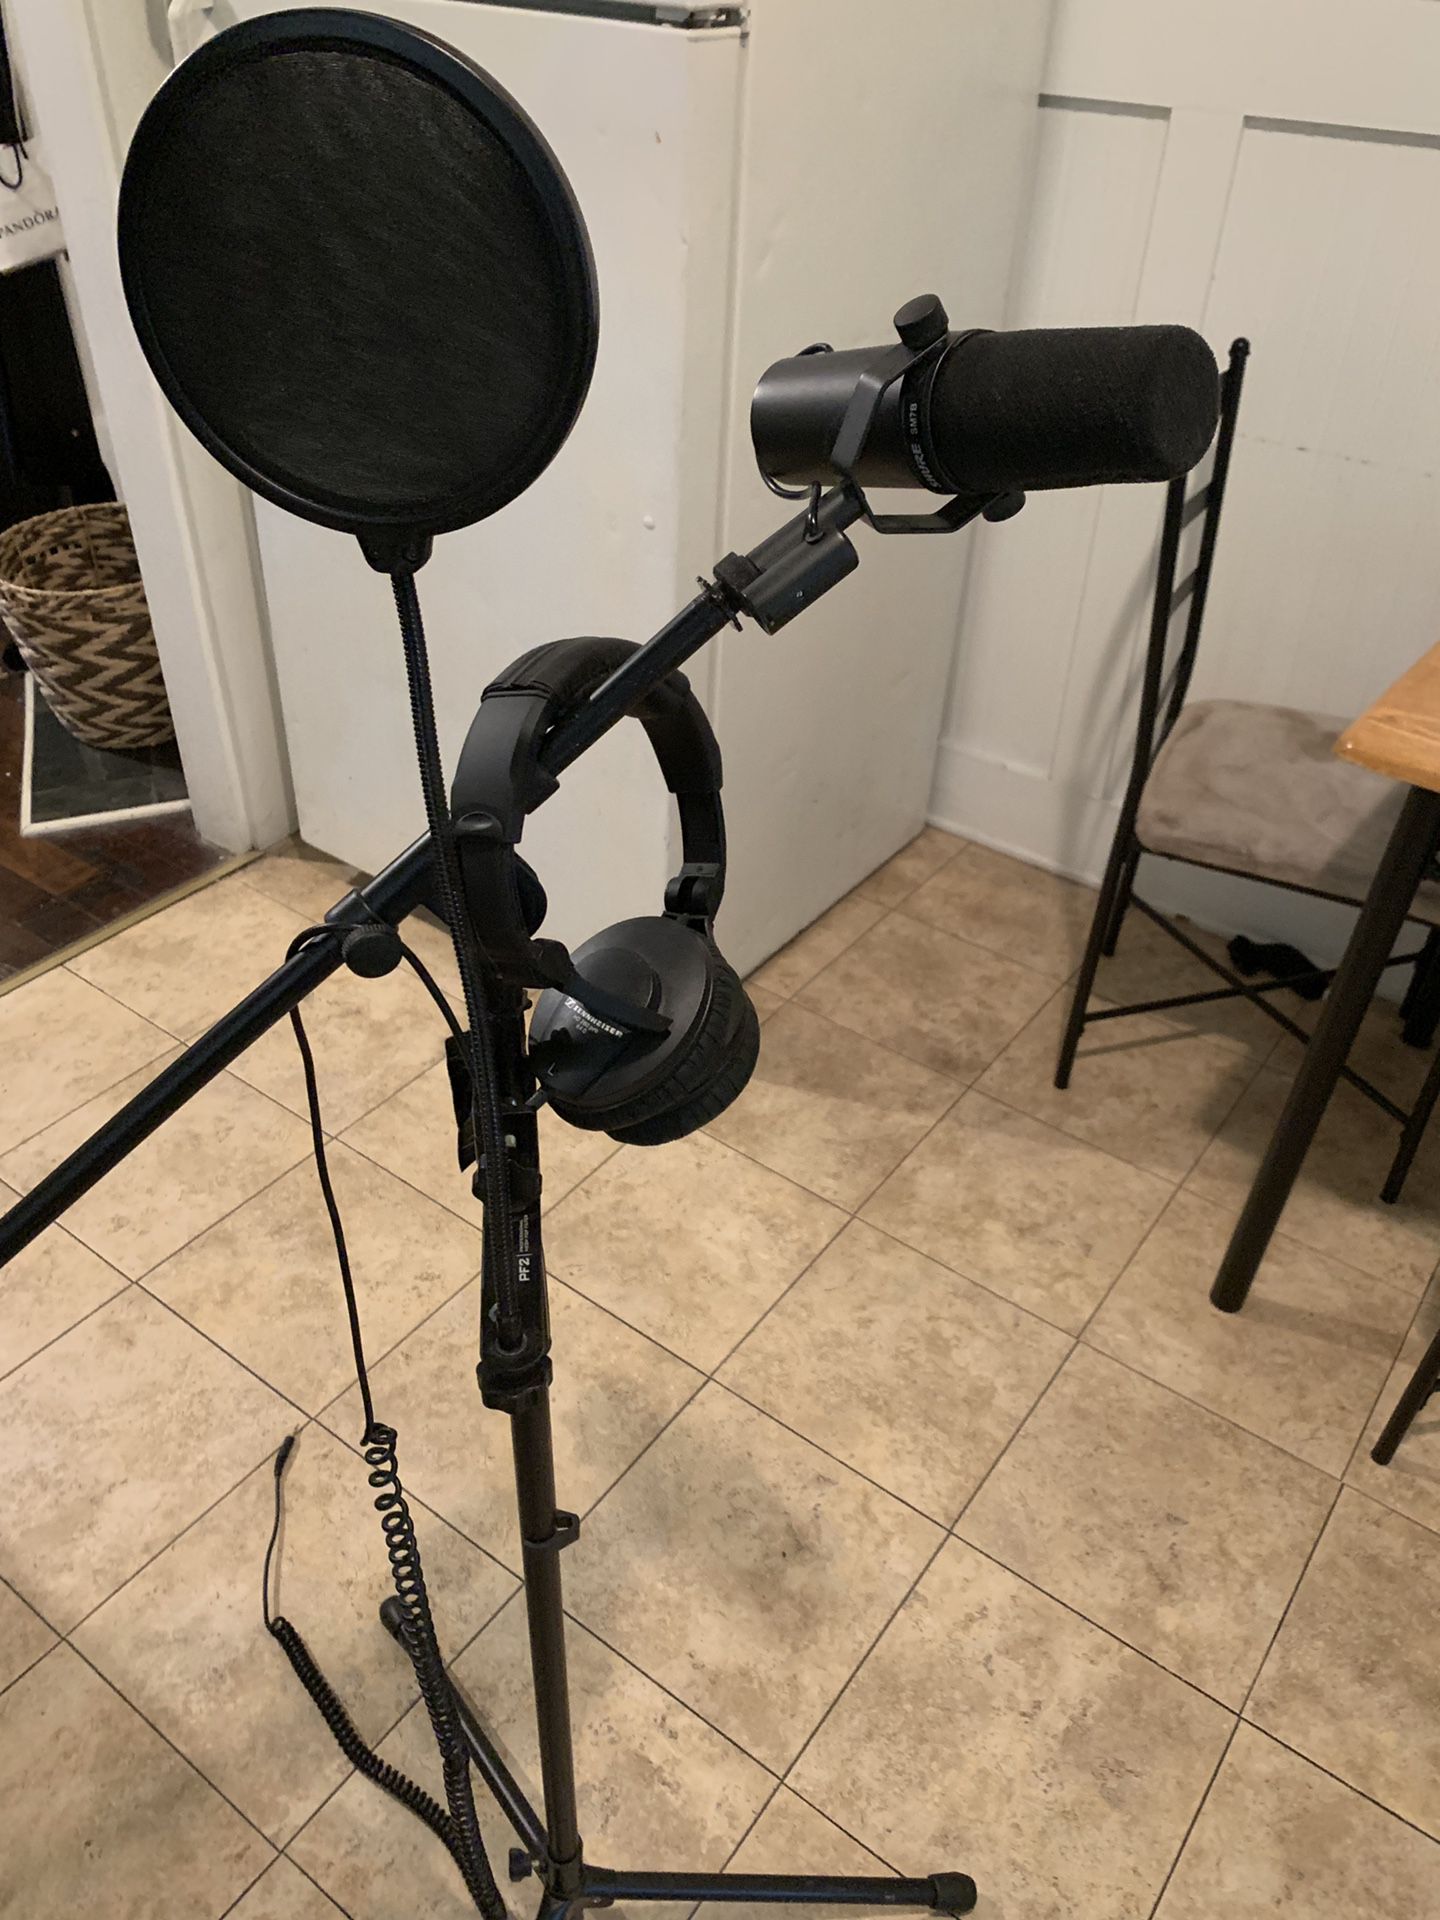 Shure Sm7b Mic With Stand Headphones Pop Filter And Xr Cables Included For Sale In Westwego La Offerup